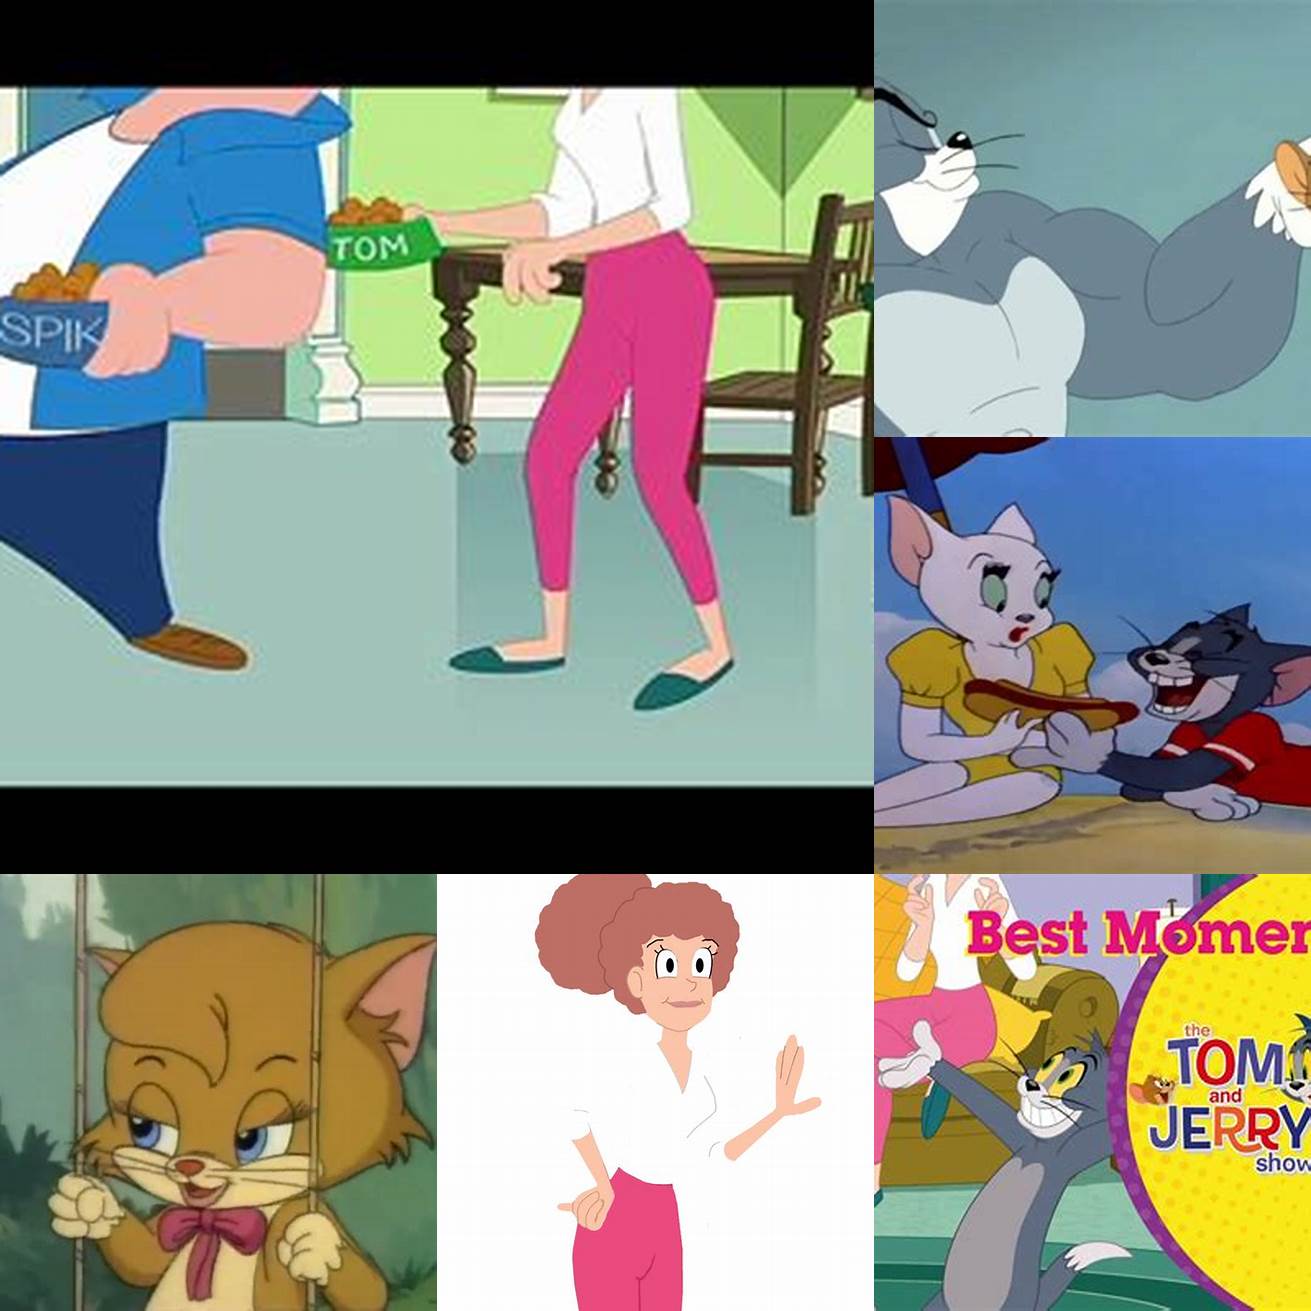 Ginger from Tom and Jerry